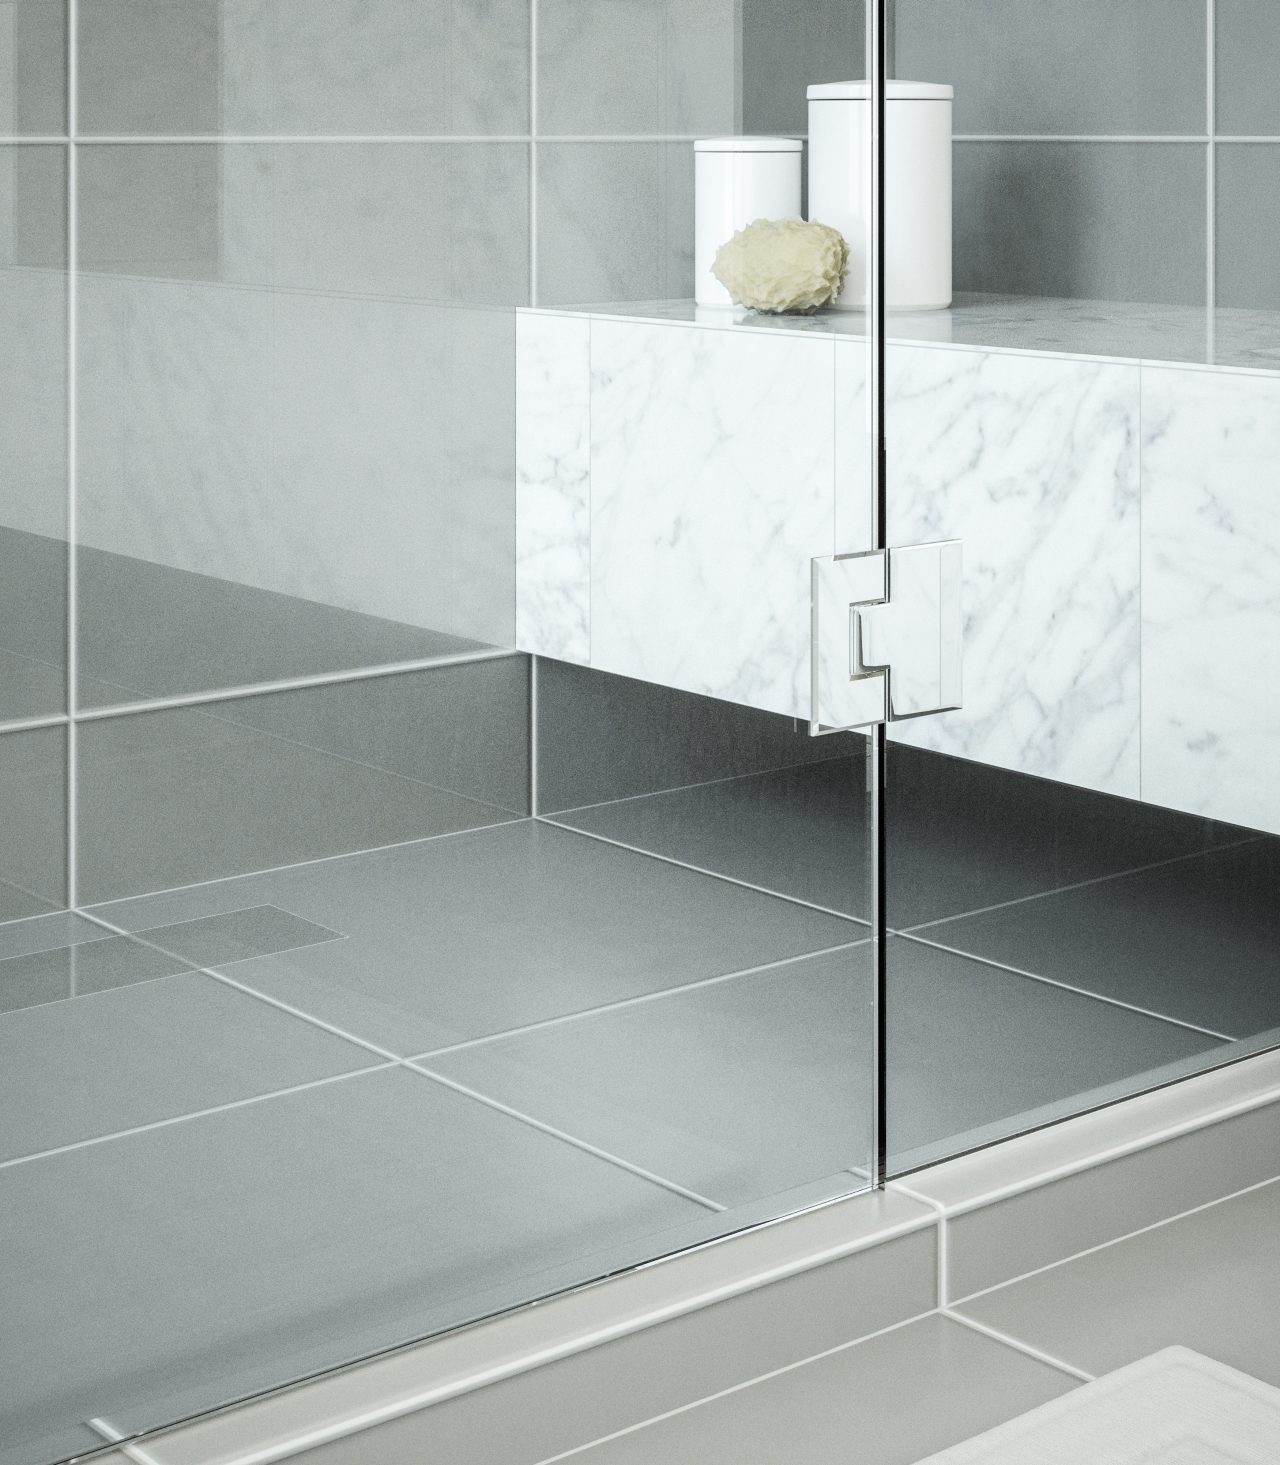 Renderings depicting uncoated shower glass and spray-on/wipe-on coatings versus ShowerGuard permanent coating.